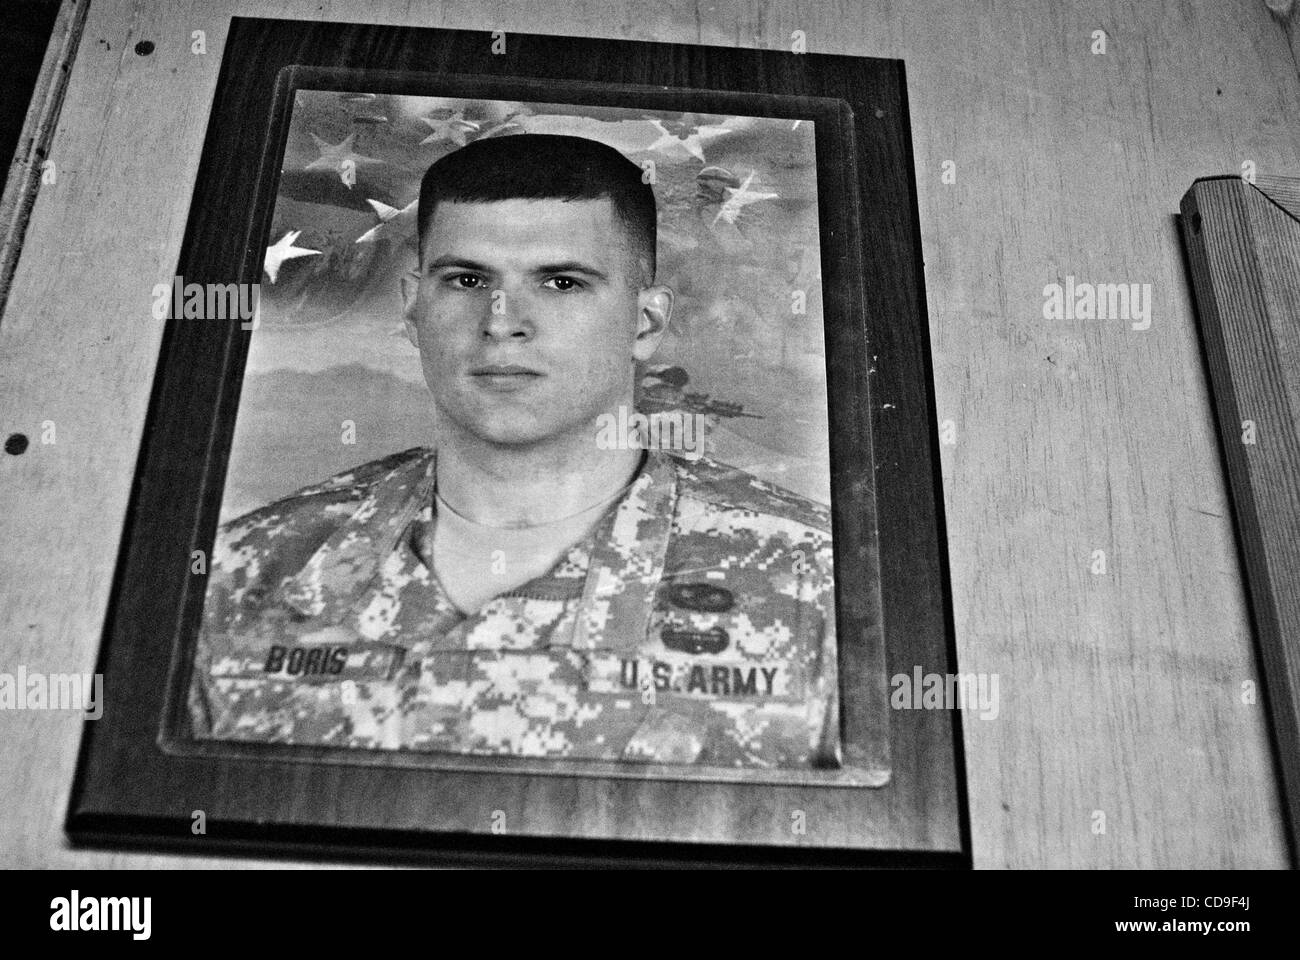 Jul 08, 2010 - Paktika , Afghanistan - A picture of Capt. DAVID BORIS in the Abu Company, 1st Battalion, 187th Infantry Regiment, command post on Forward Operating Base Boris. Boris was the commander of Alpha Troop, 1st Squadron, 91st Cavalry Regiment, 173rd Airborne Brigade, when he was killed when Stock Photo